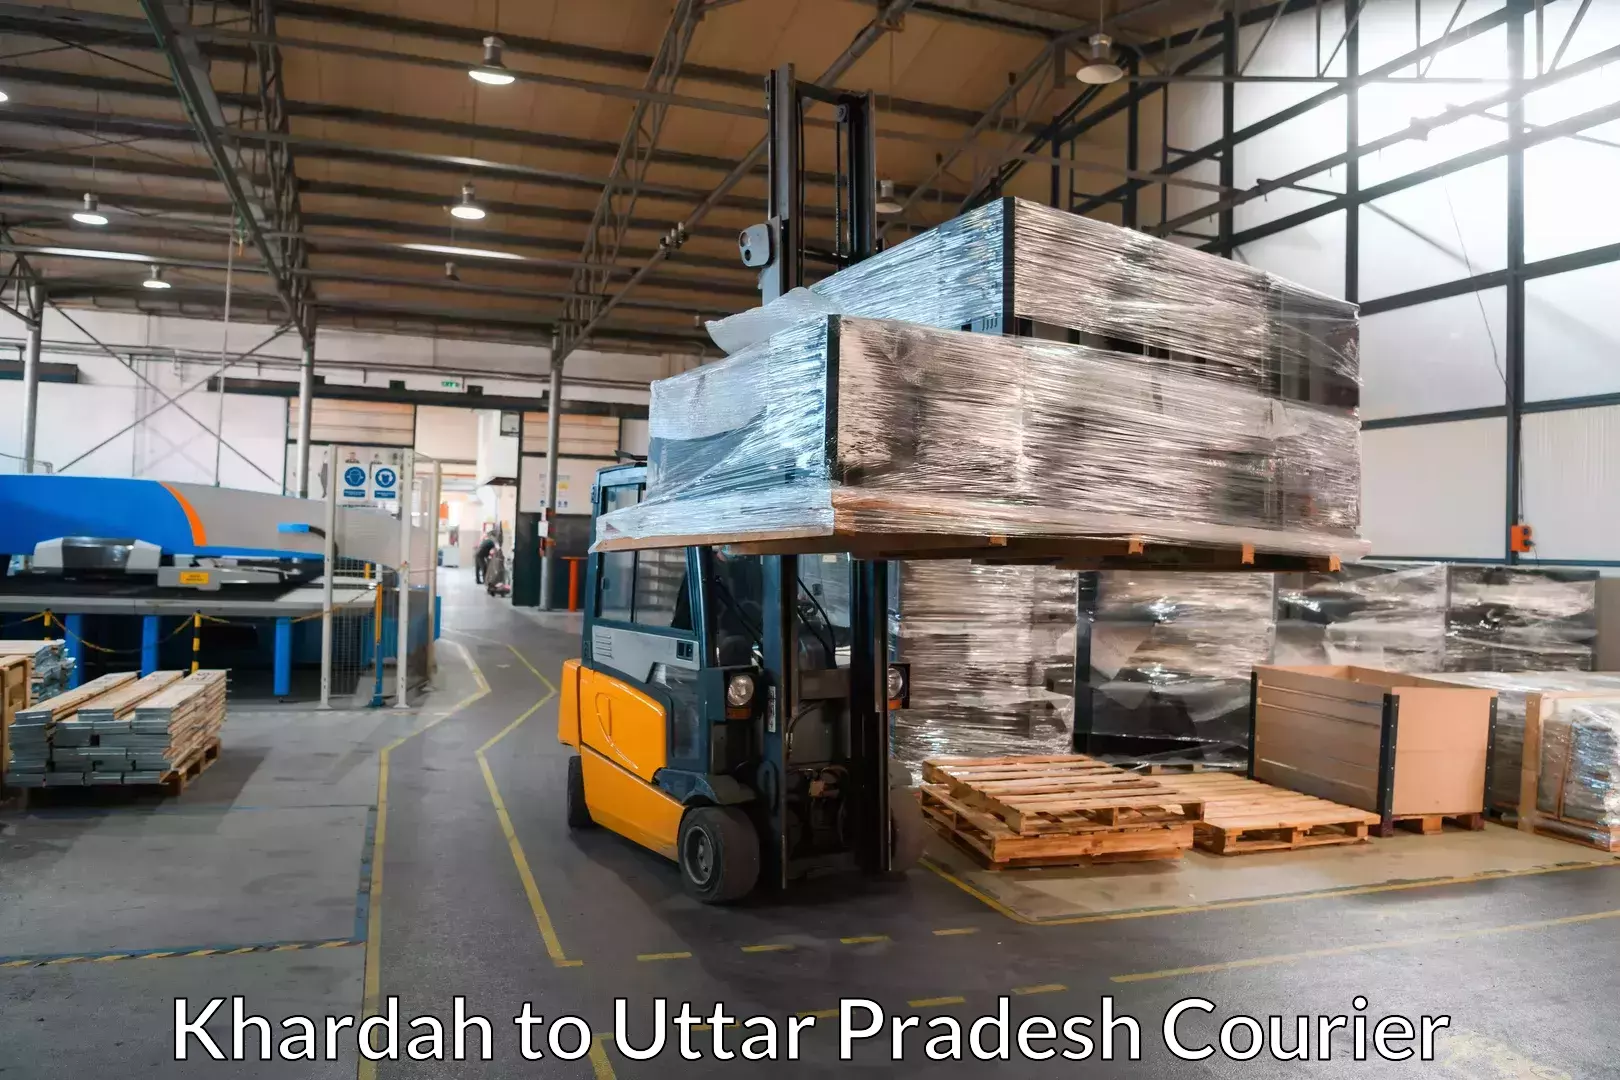 Full-service relocation Khardah to Lucknow